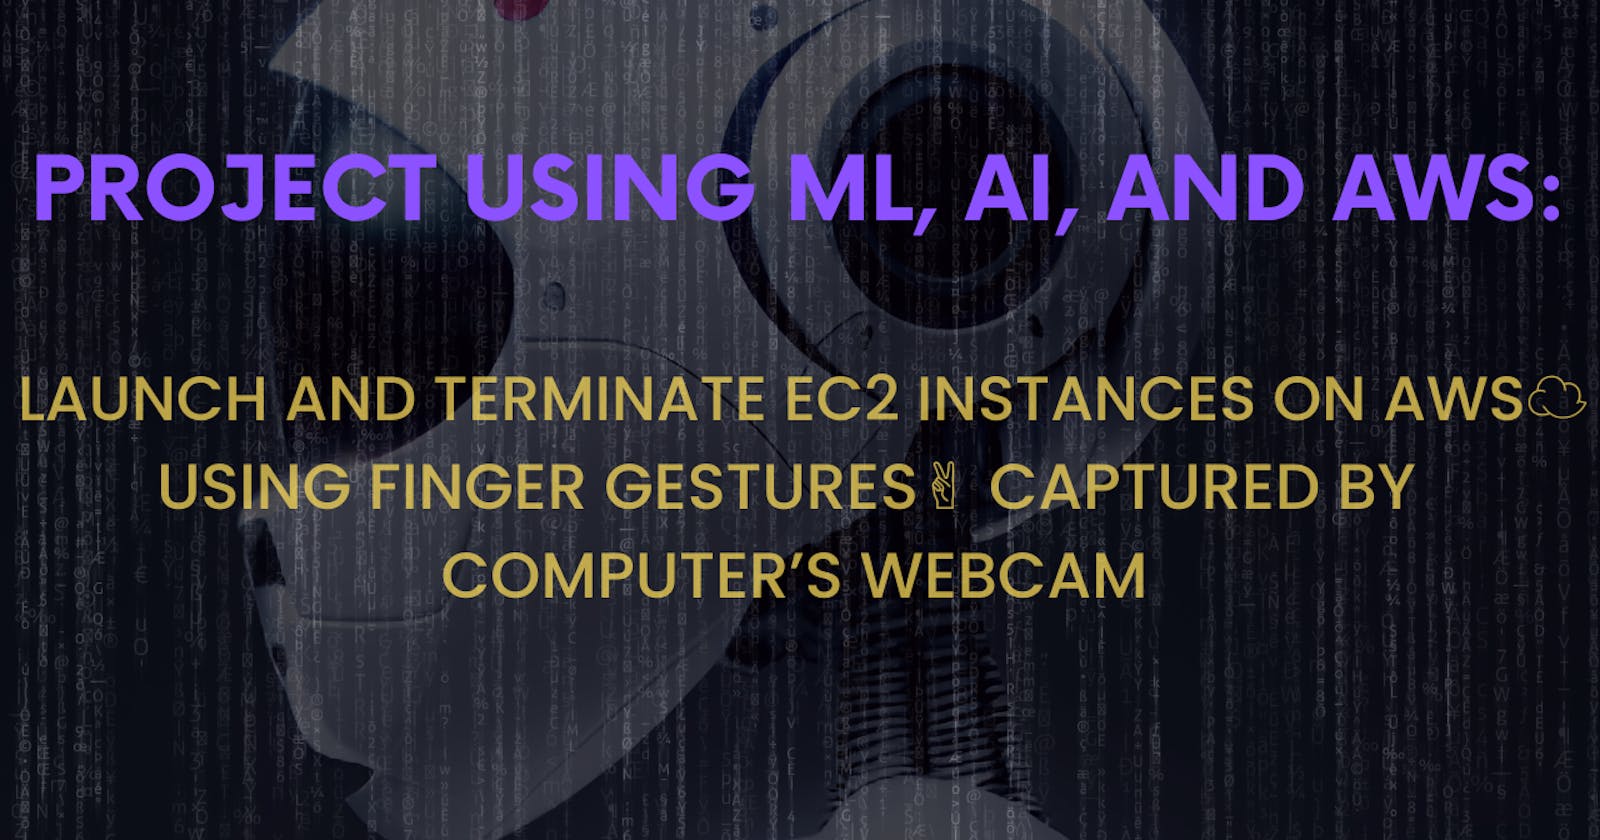 Project Using ML, AI, AND AWS: EC2 Instance Management With Finger Gestures